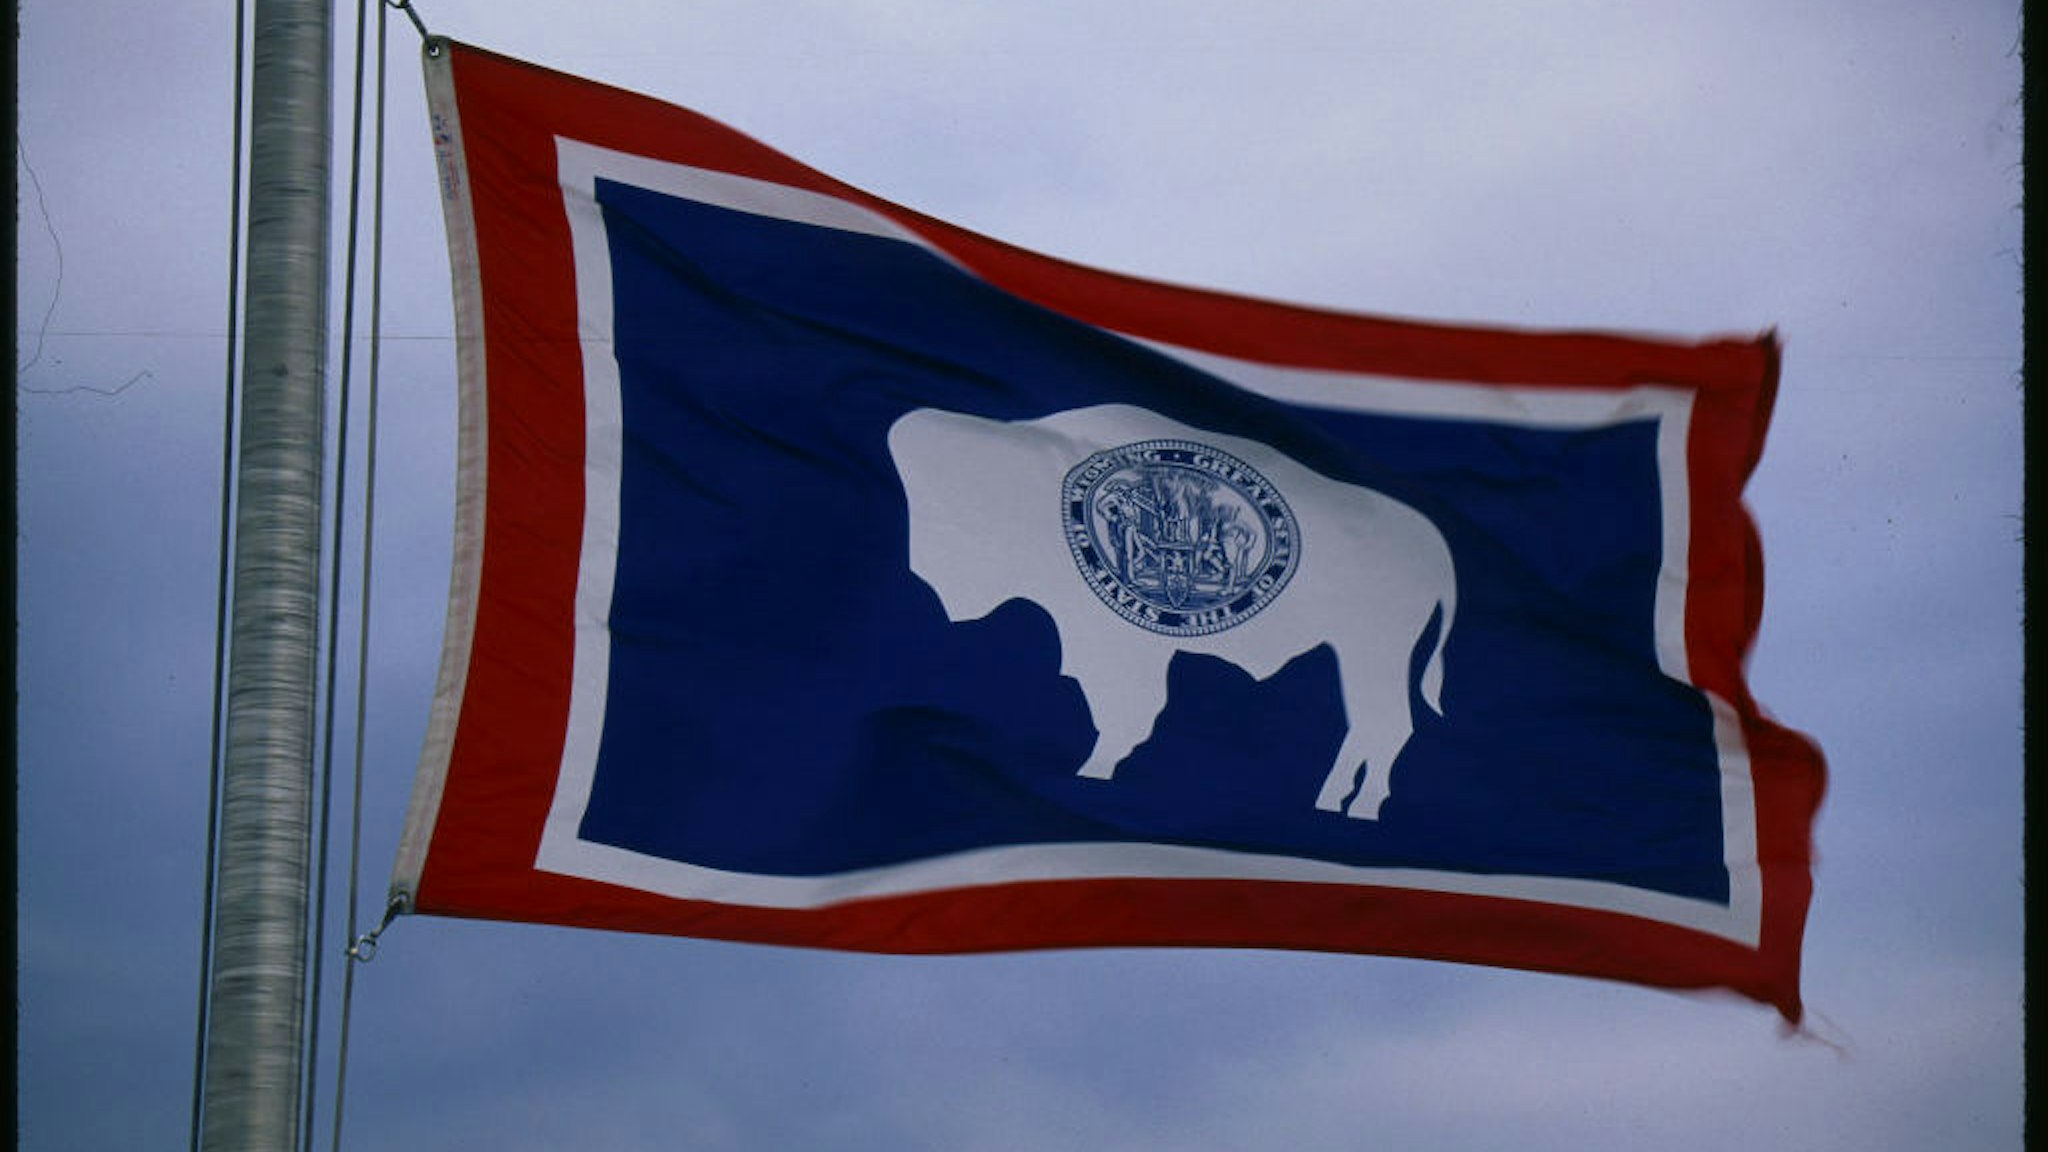 Wyoming state flag. (Visions of America LLC/Contributor via Getty Images)